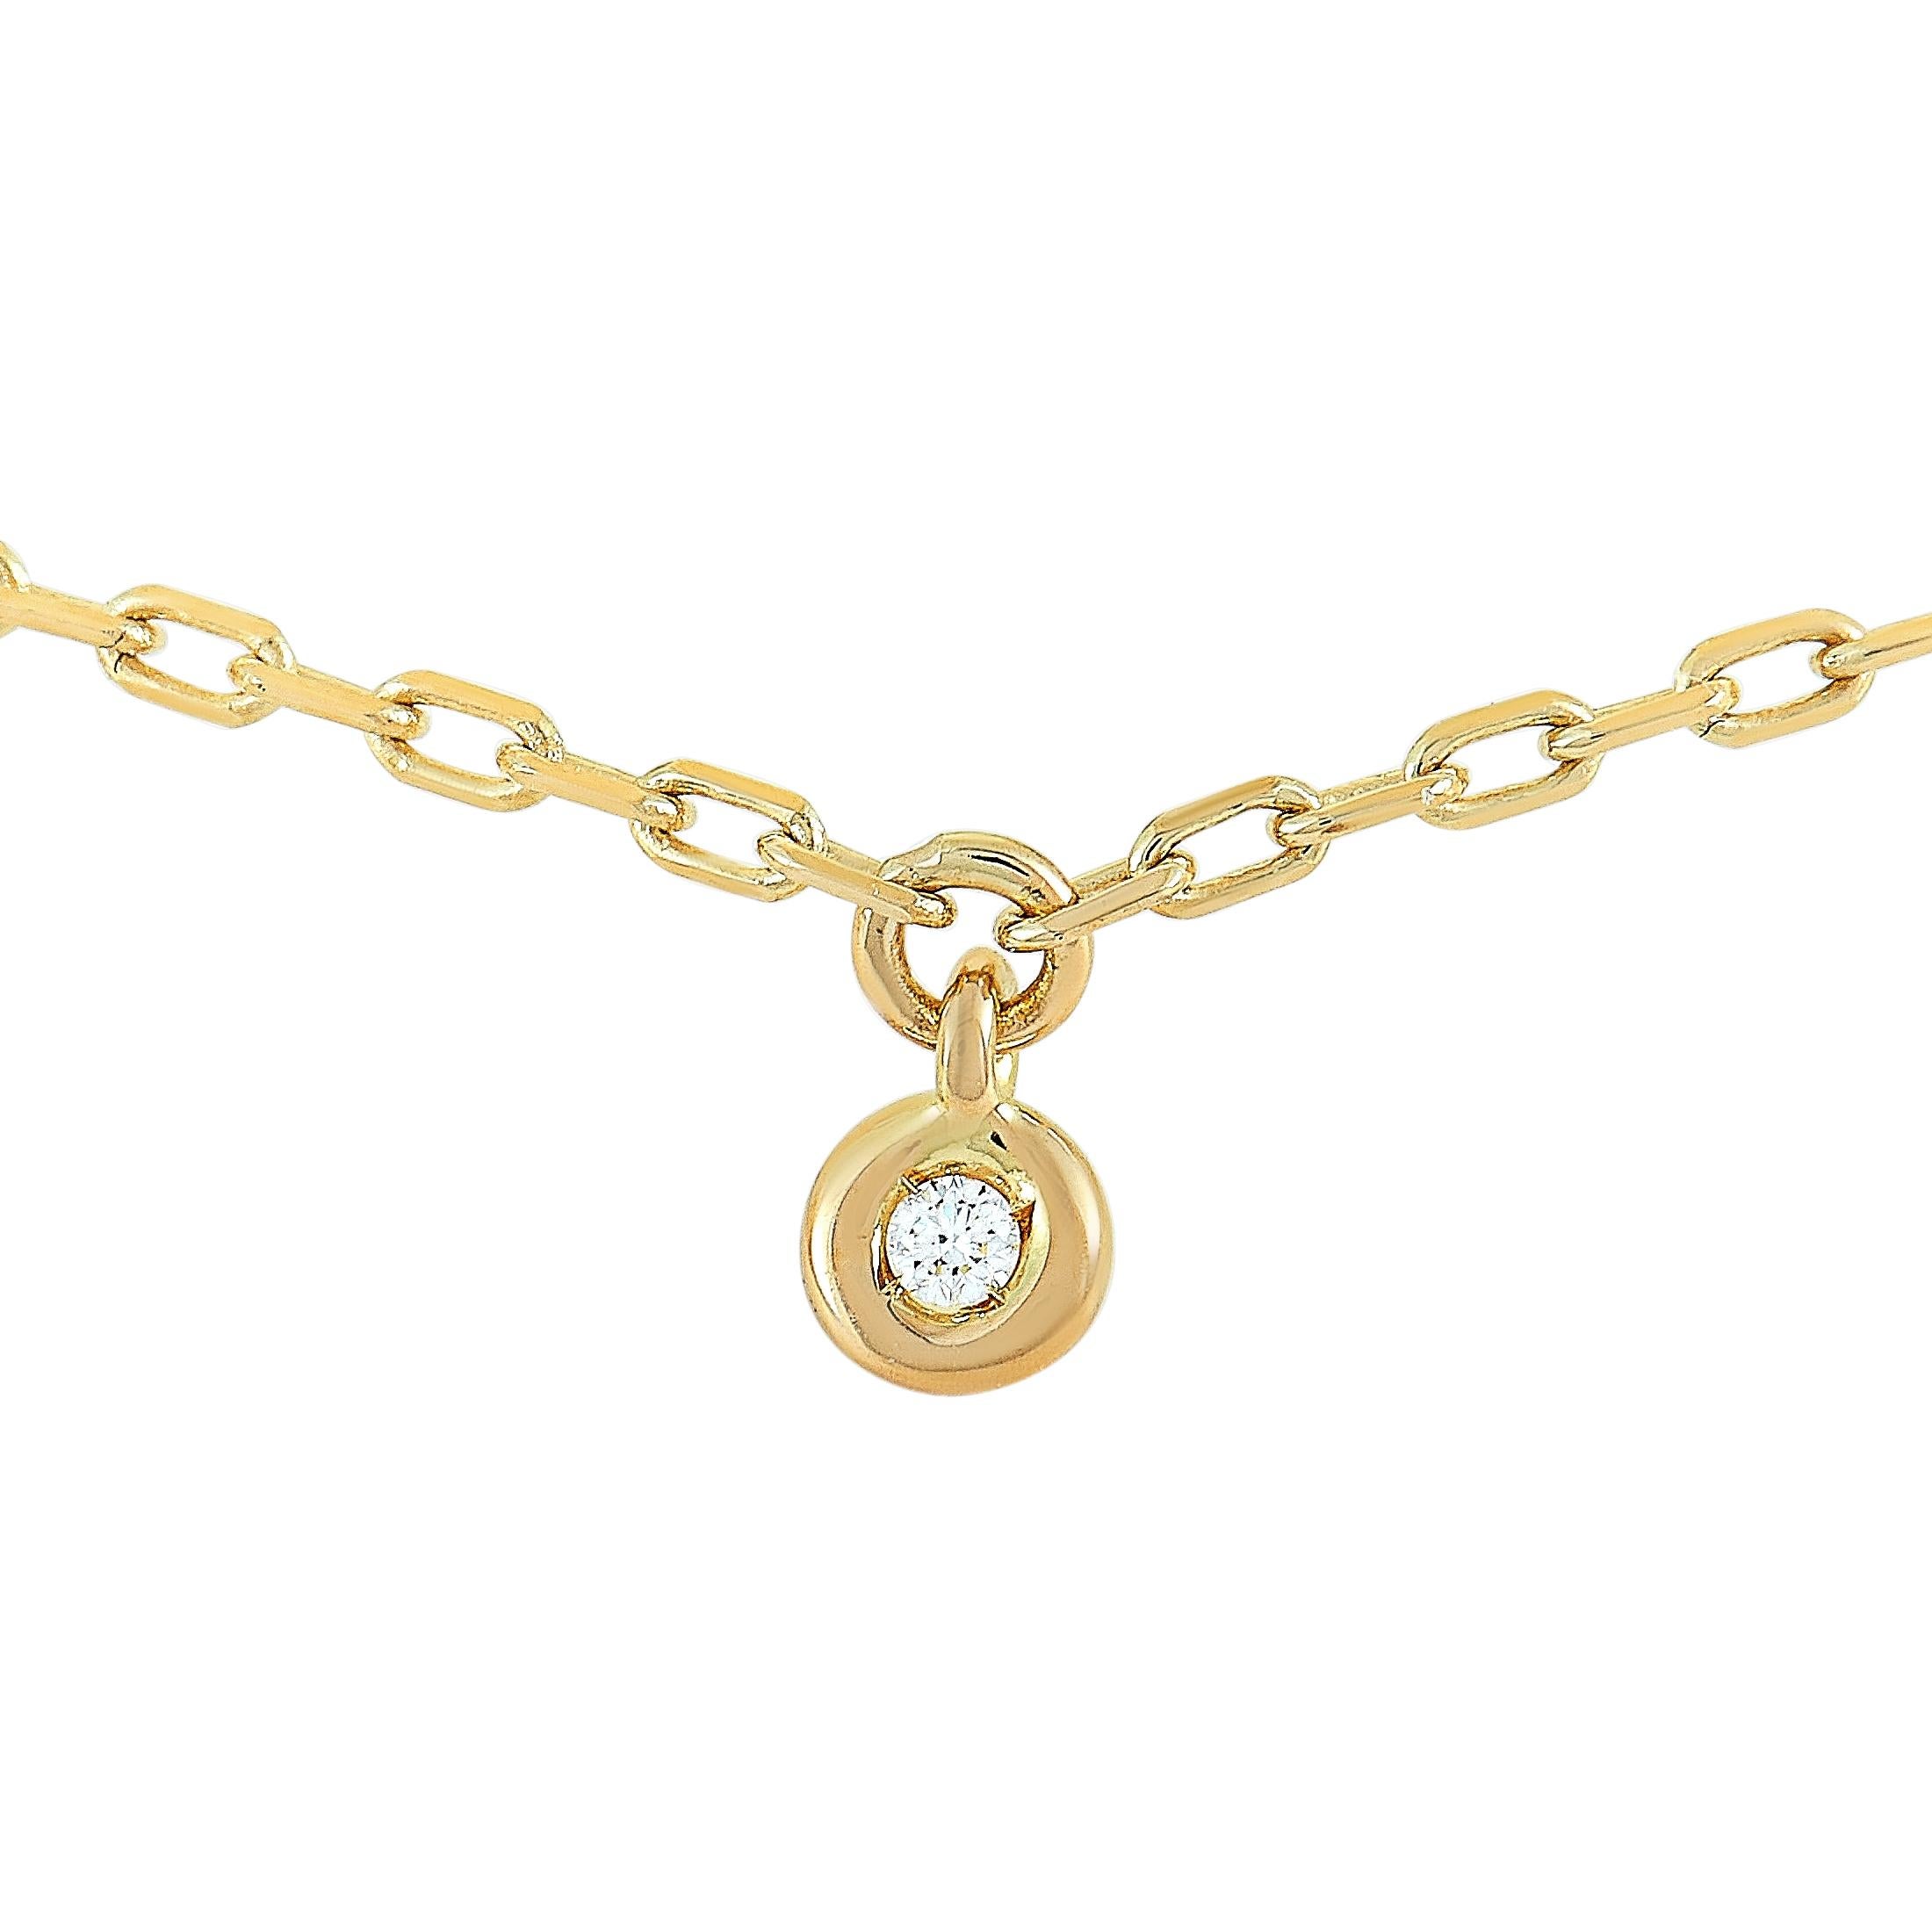 The Gucci “GG Running” bracelet is made out of 18K yellow gold and diamonds and weighs 2.3 grams. The diamonds boast GH color and VVS clarity and weigh approximately 0.20 carats in total. The bracelet measures 7” in length.
 
 This jewelry piece is